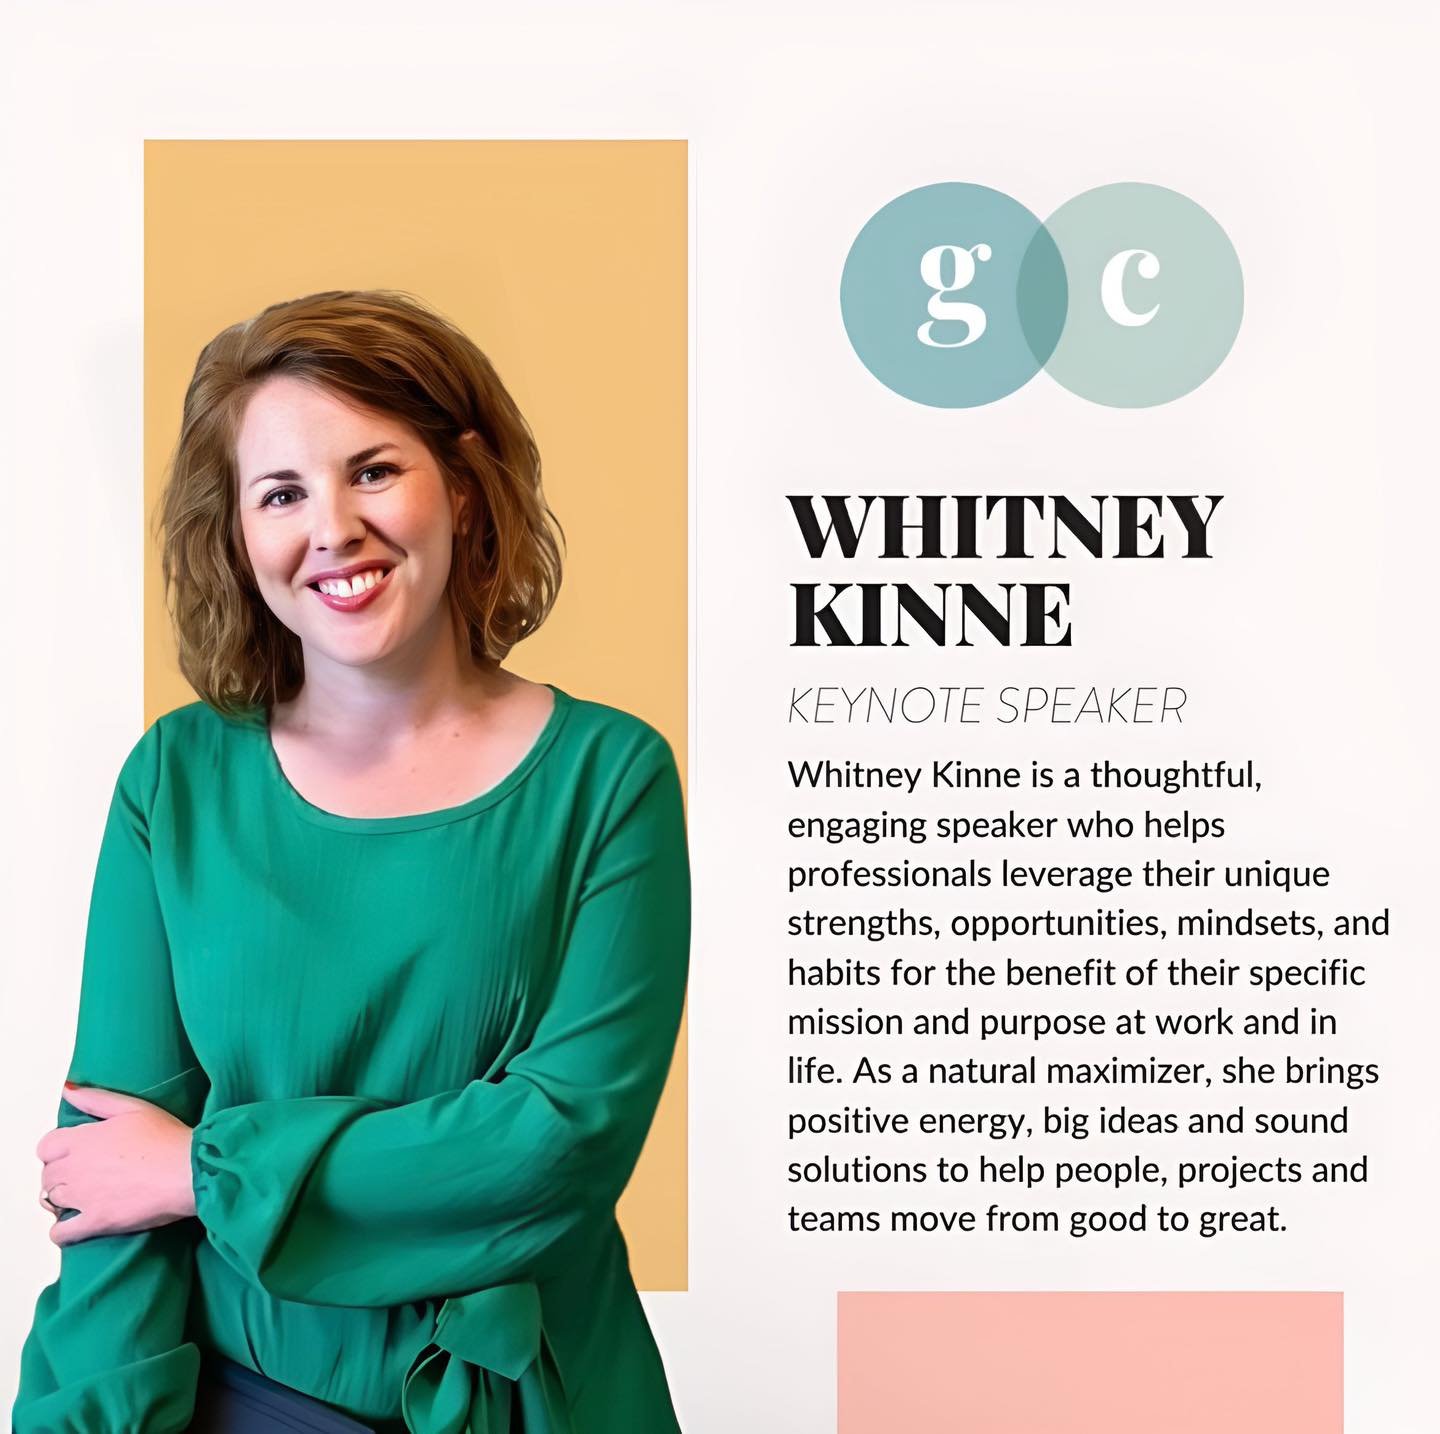 Friends, we are so excited to introduce one of our keynote speakers for Grace Collaborative, Whitney Kinne!

For as long as she can remember, Whitney&rsquo;s dad encouraged her to &ldquo;show some leadership.&rdquo; Those three words, along with year